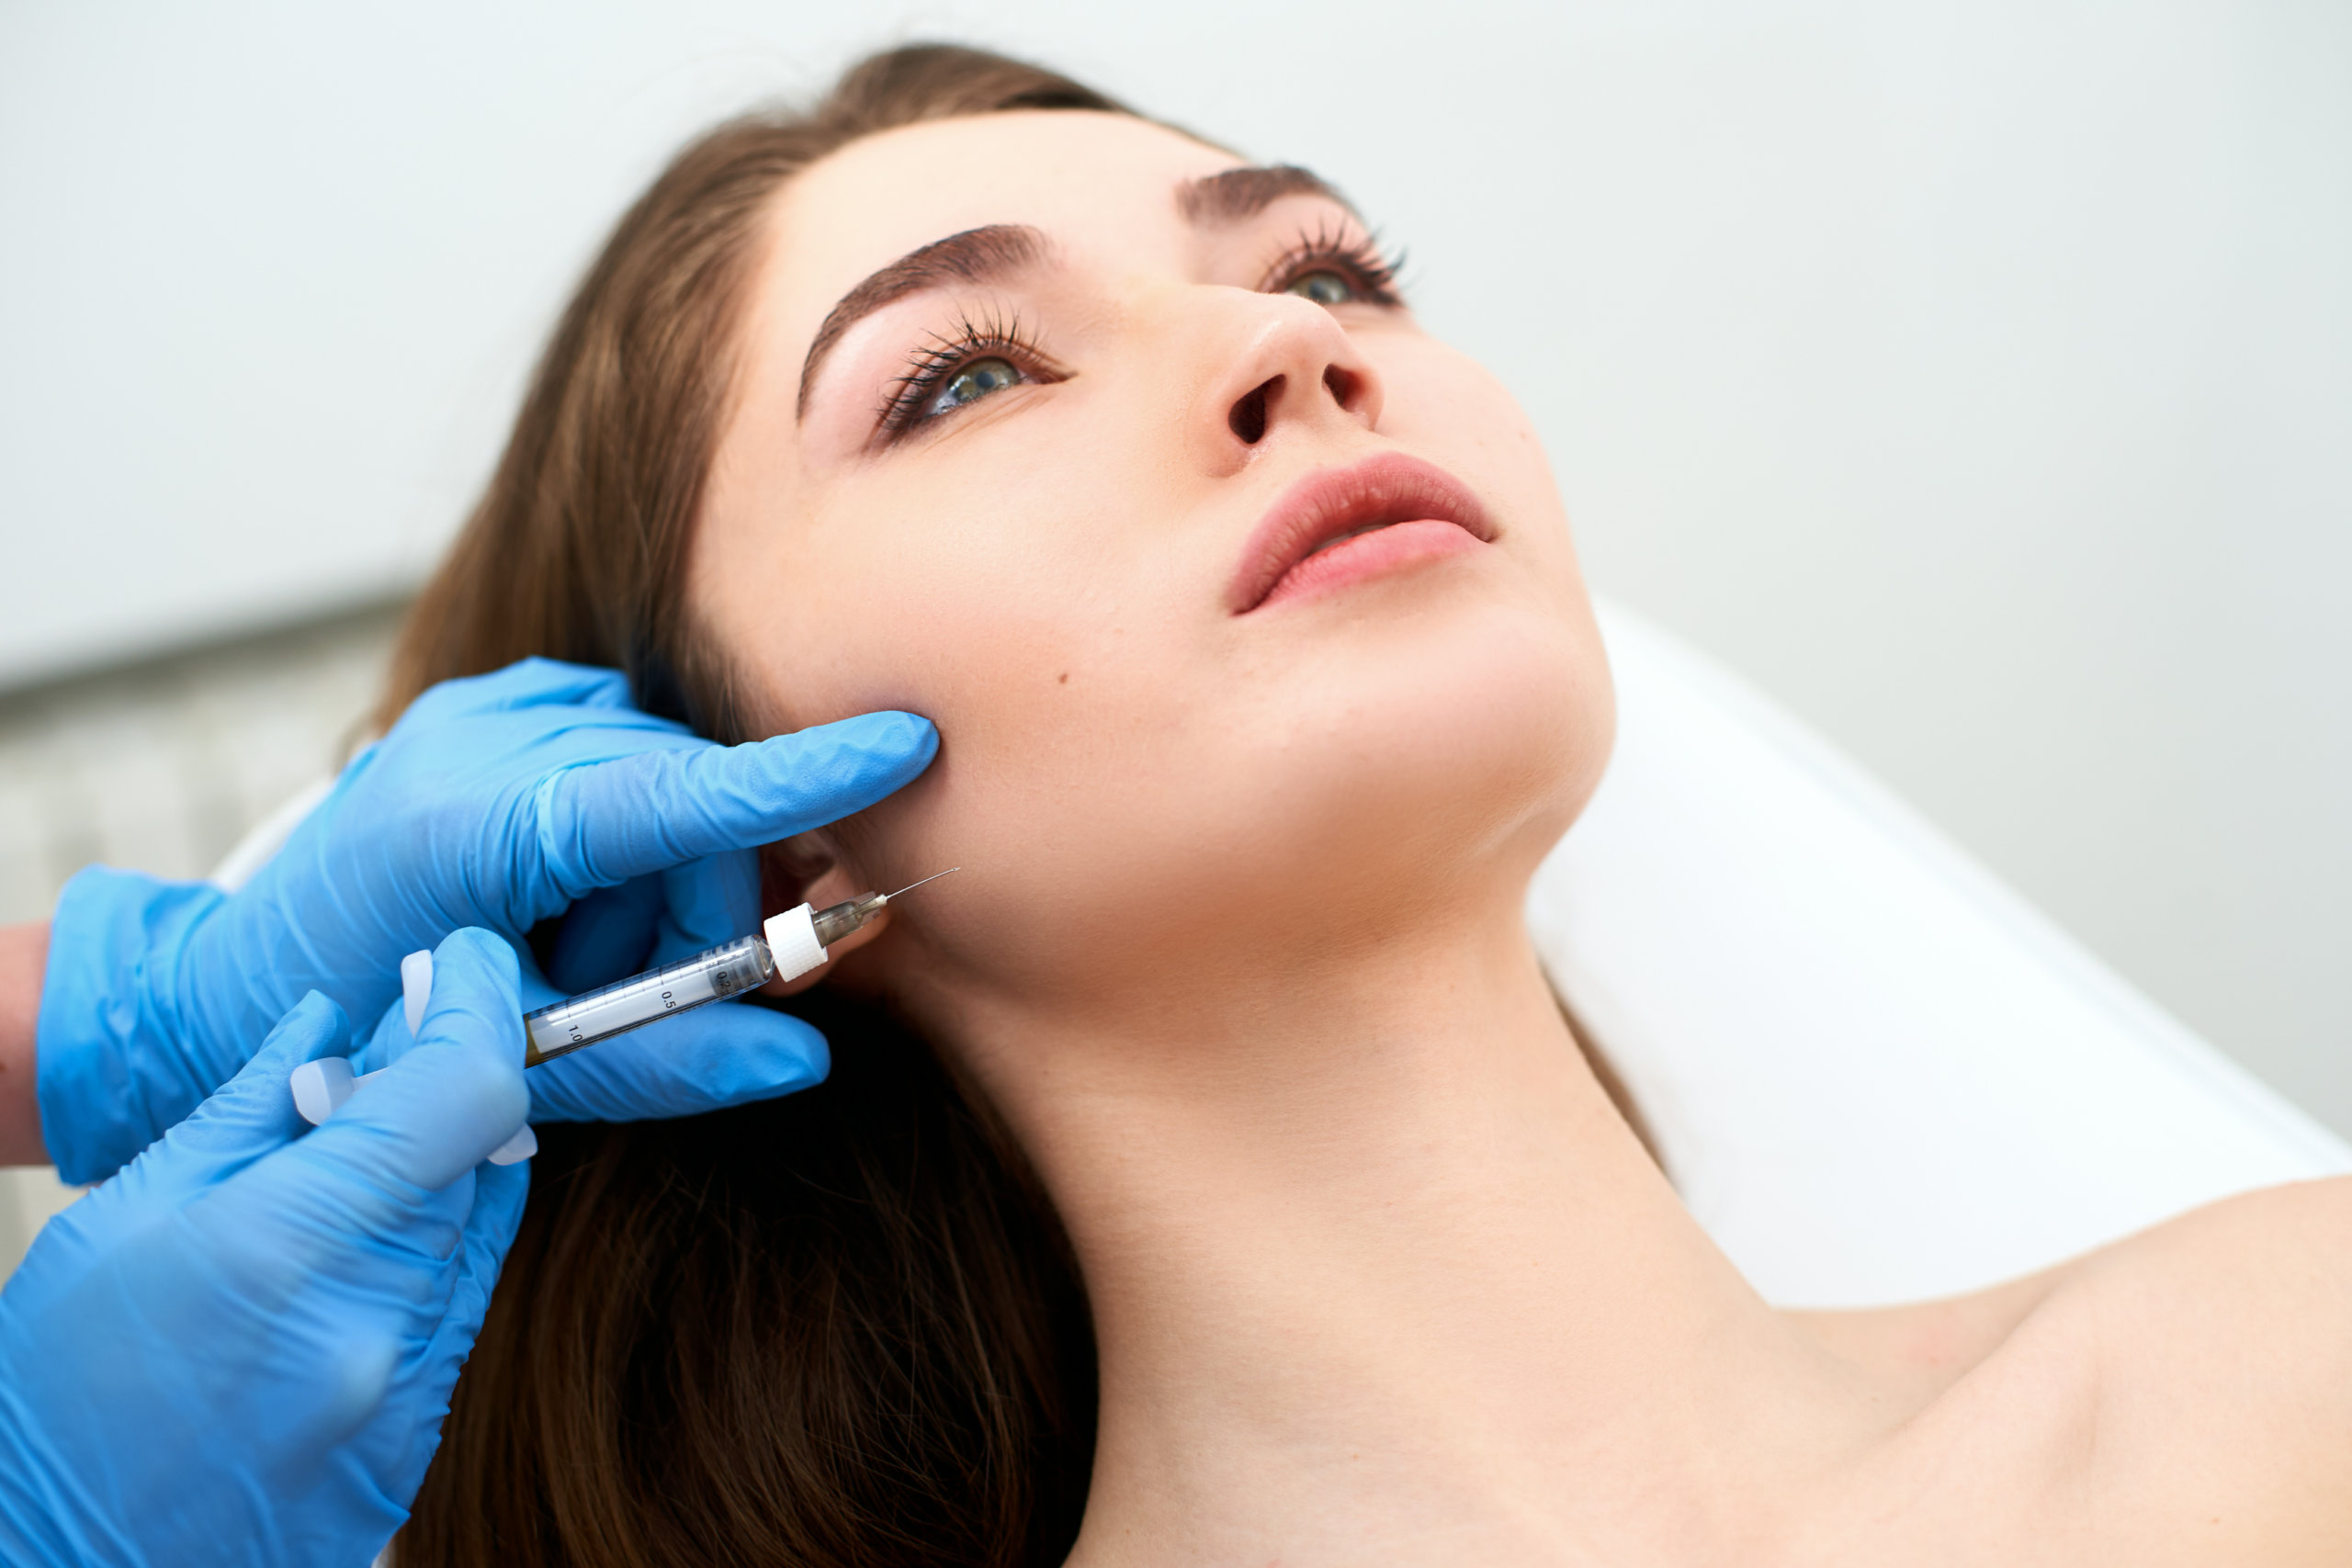 What Are The Benefits of Dermal Fillers